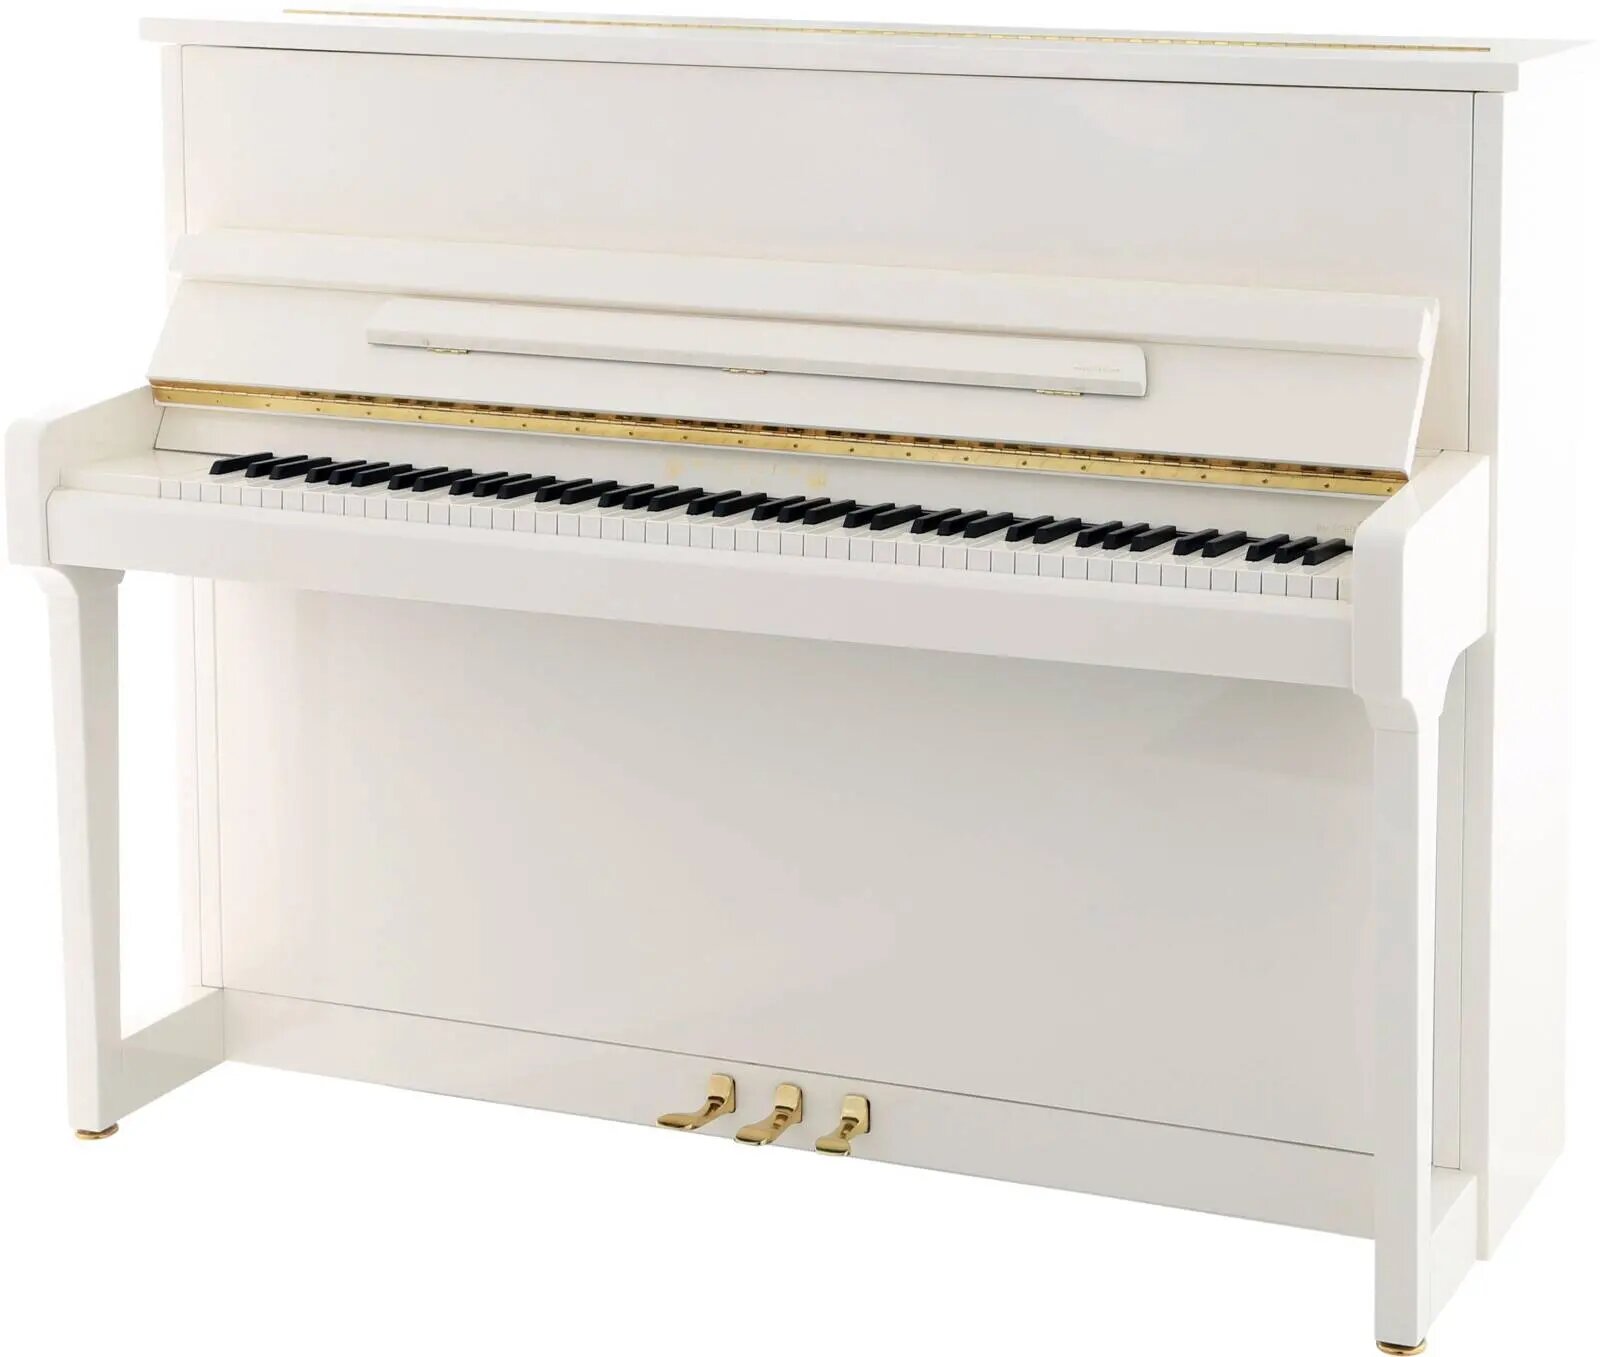 Schimmel W114 Tradition Glossy white + TwinTone silencer system : photo 1